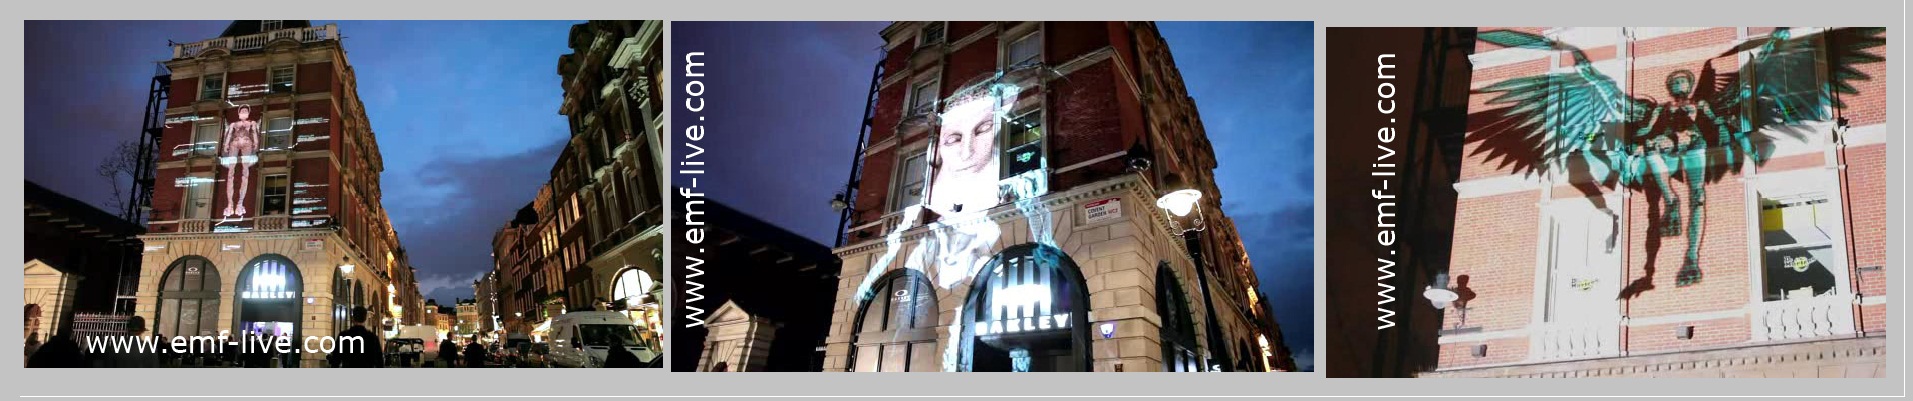 3d Video Mapping Projection Covent Garden